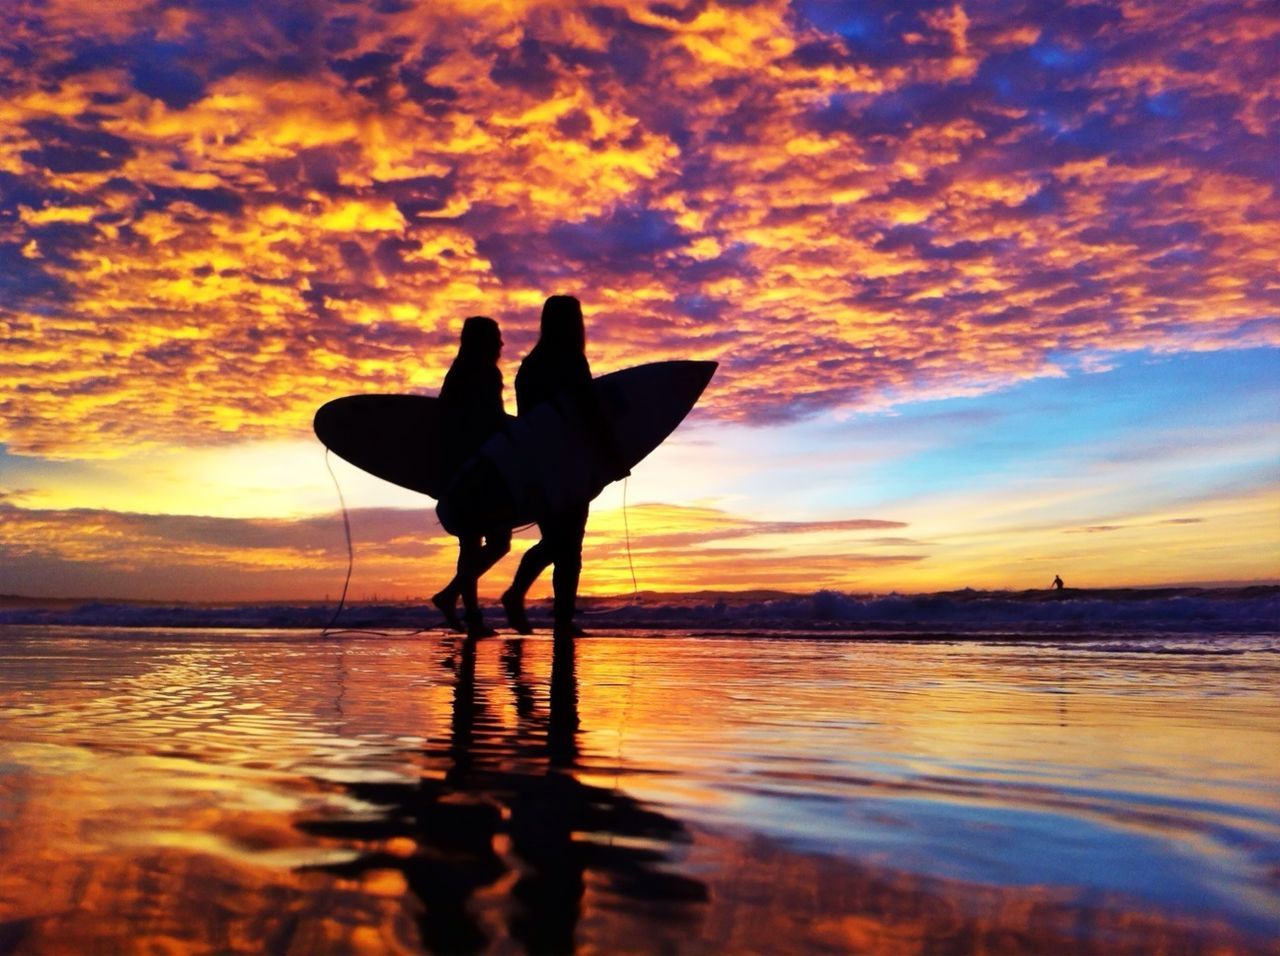 Two silhouette men with surfboards on beach at sunset